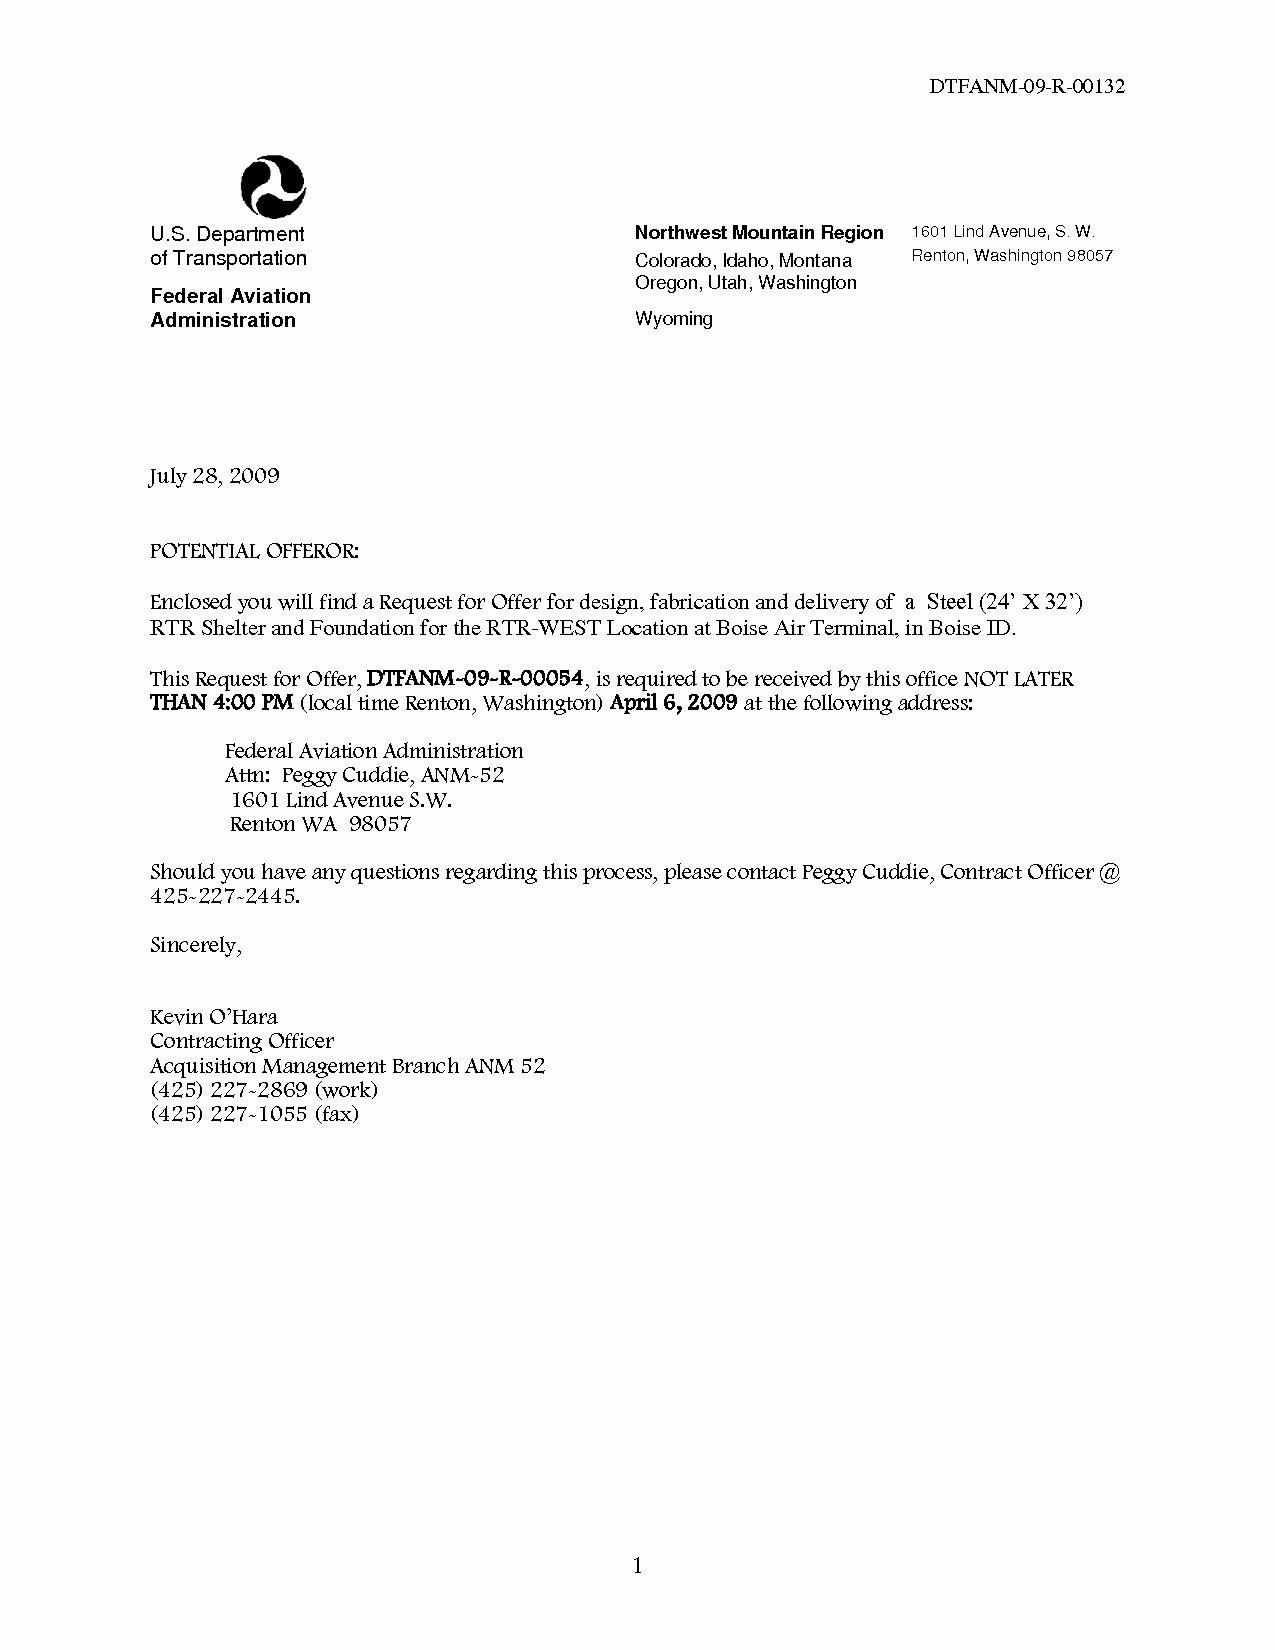 Format Of A Recomendation Letter Lovely Bank Reference Letter Template Mughals